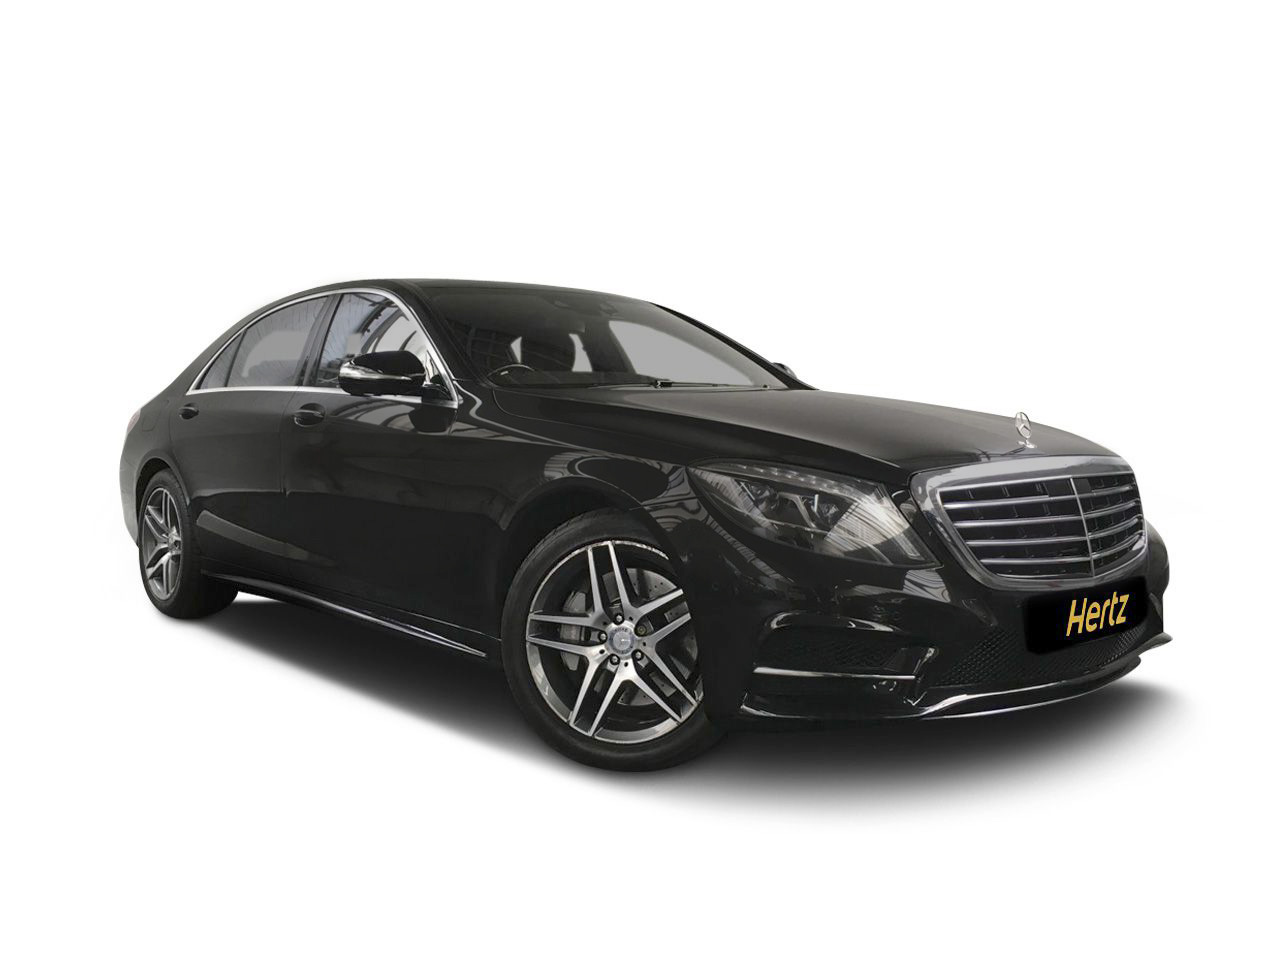 Mercedes S500 LWB car for hire